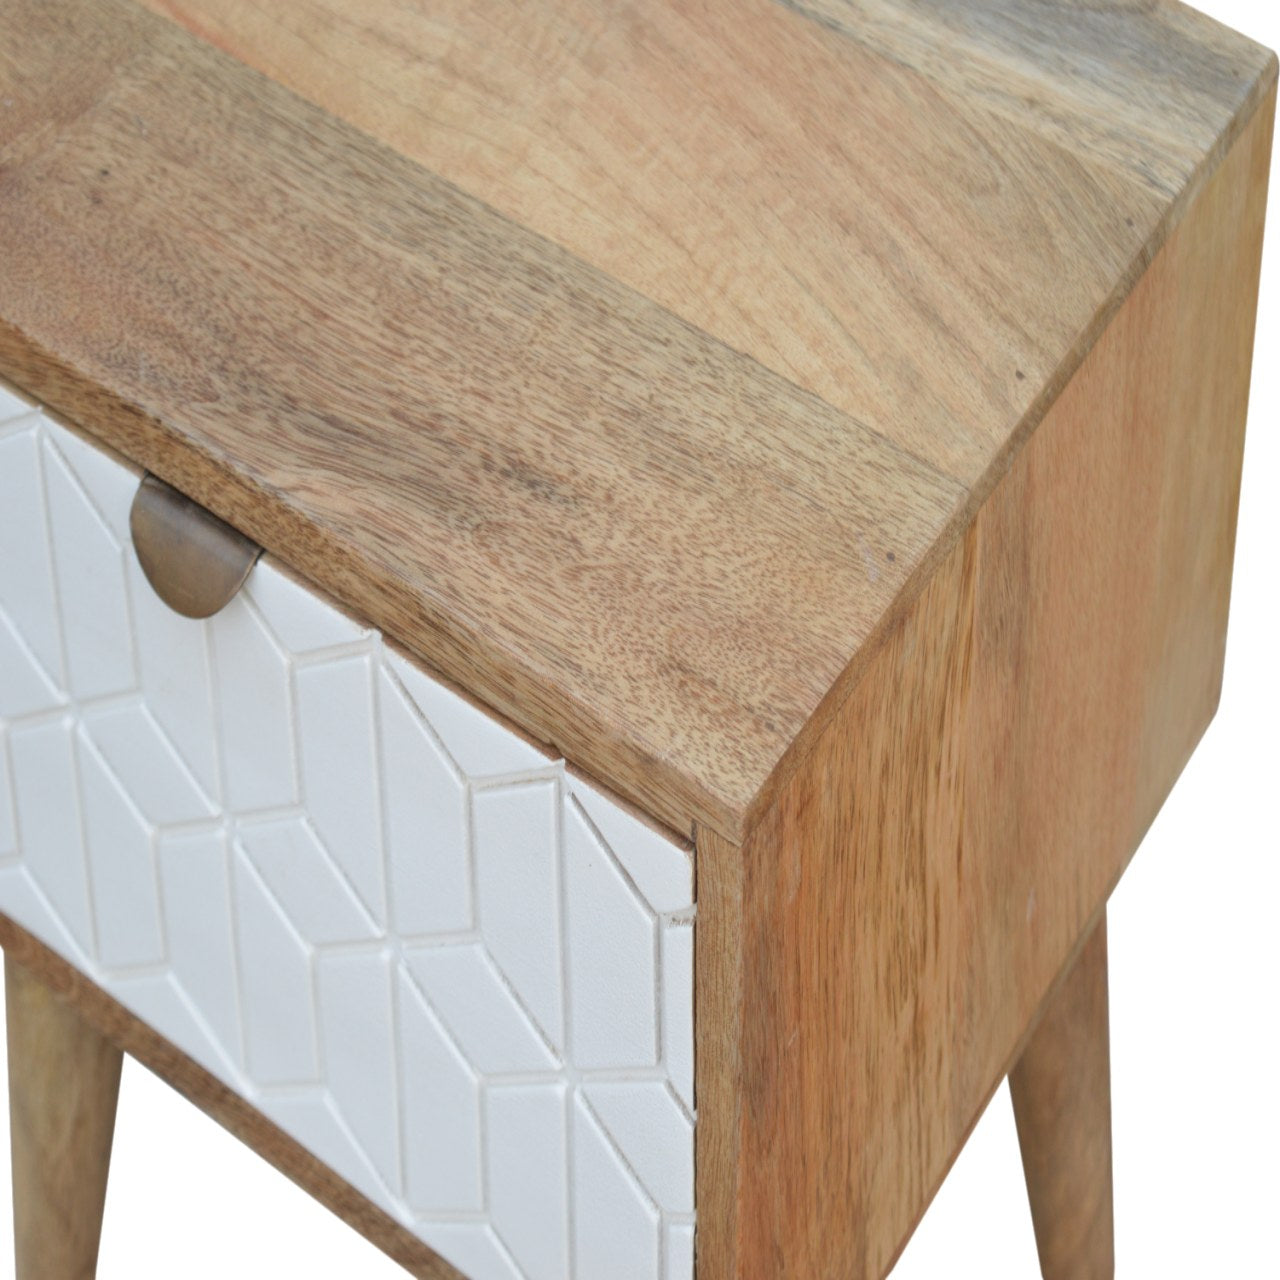 Sleek White and Wood Carved Bedside Table